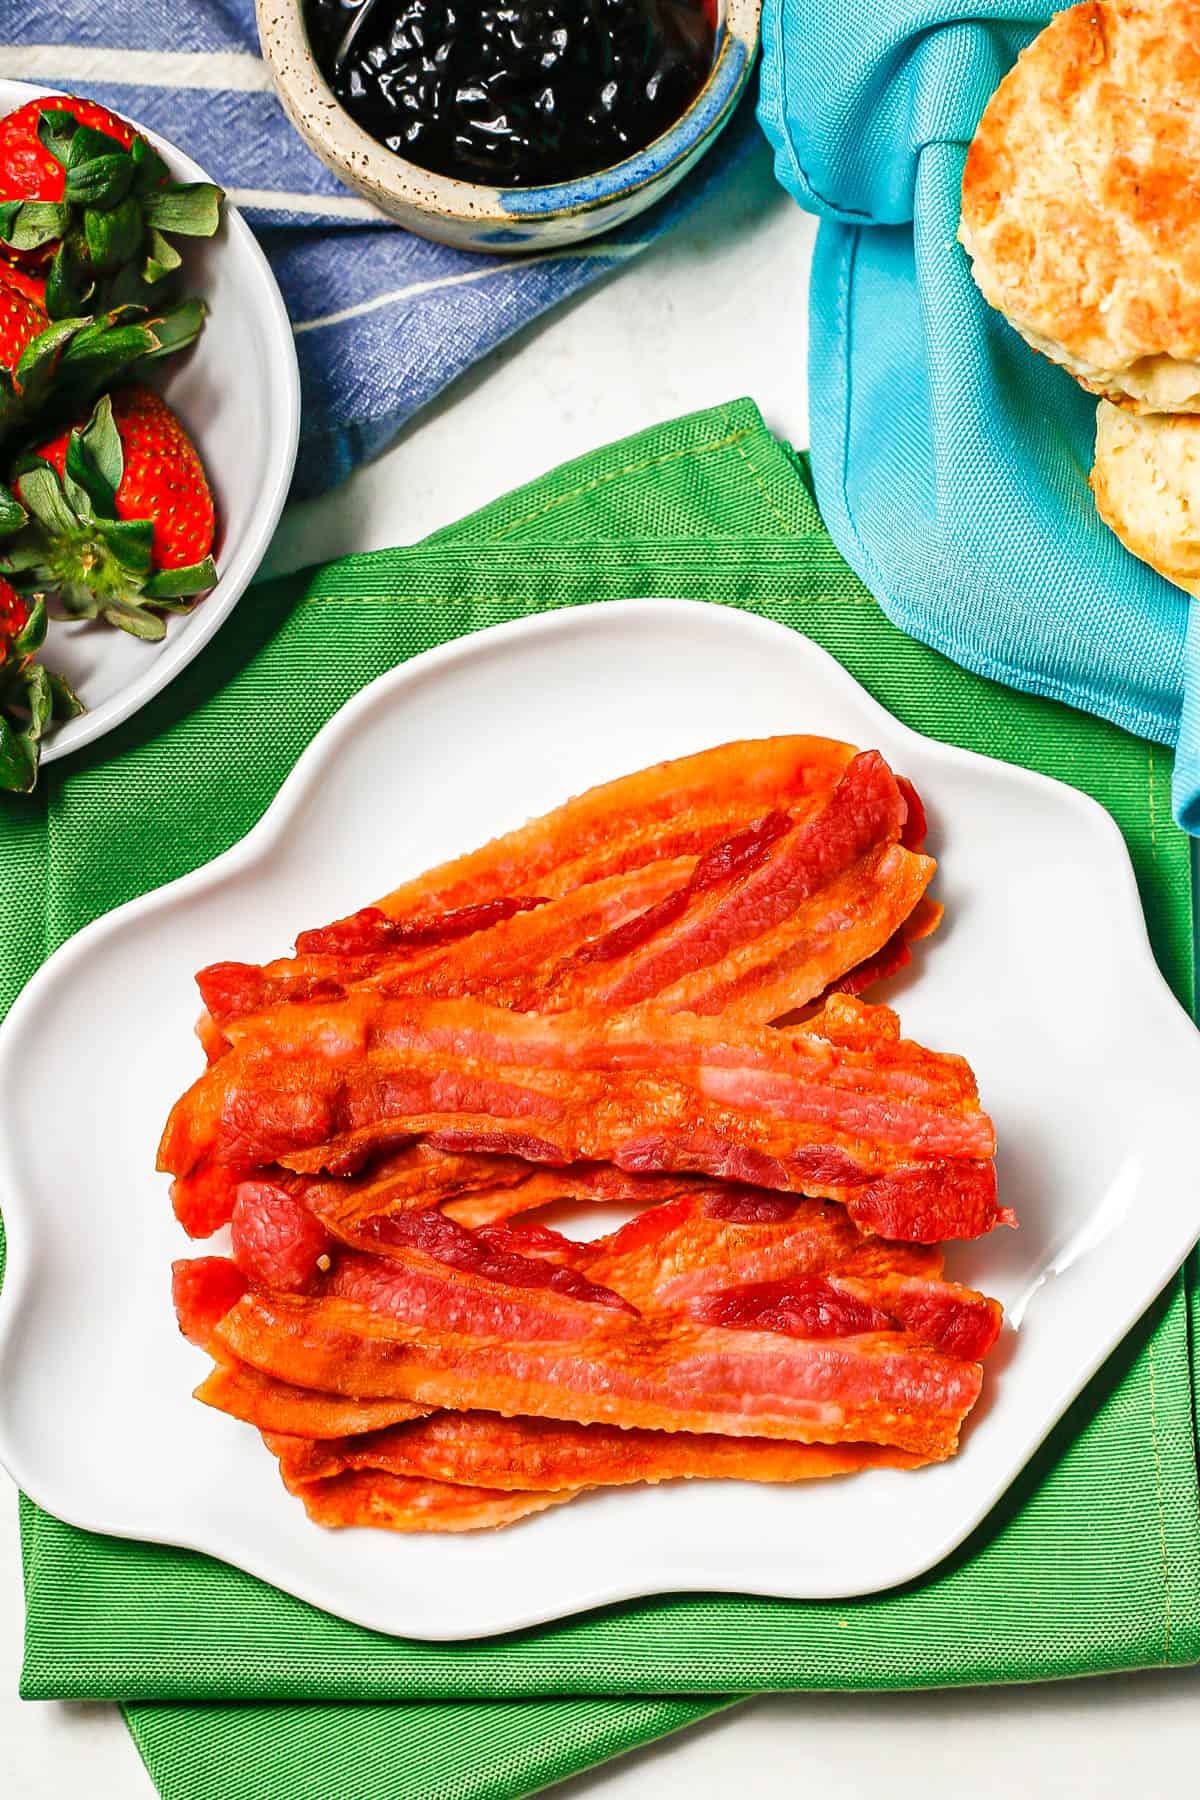 Strips of cooked bacon served on a white plate set on green napkins with fruit and biscuits nearby.